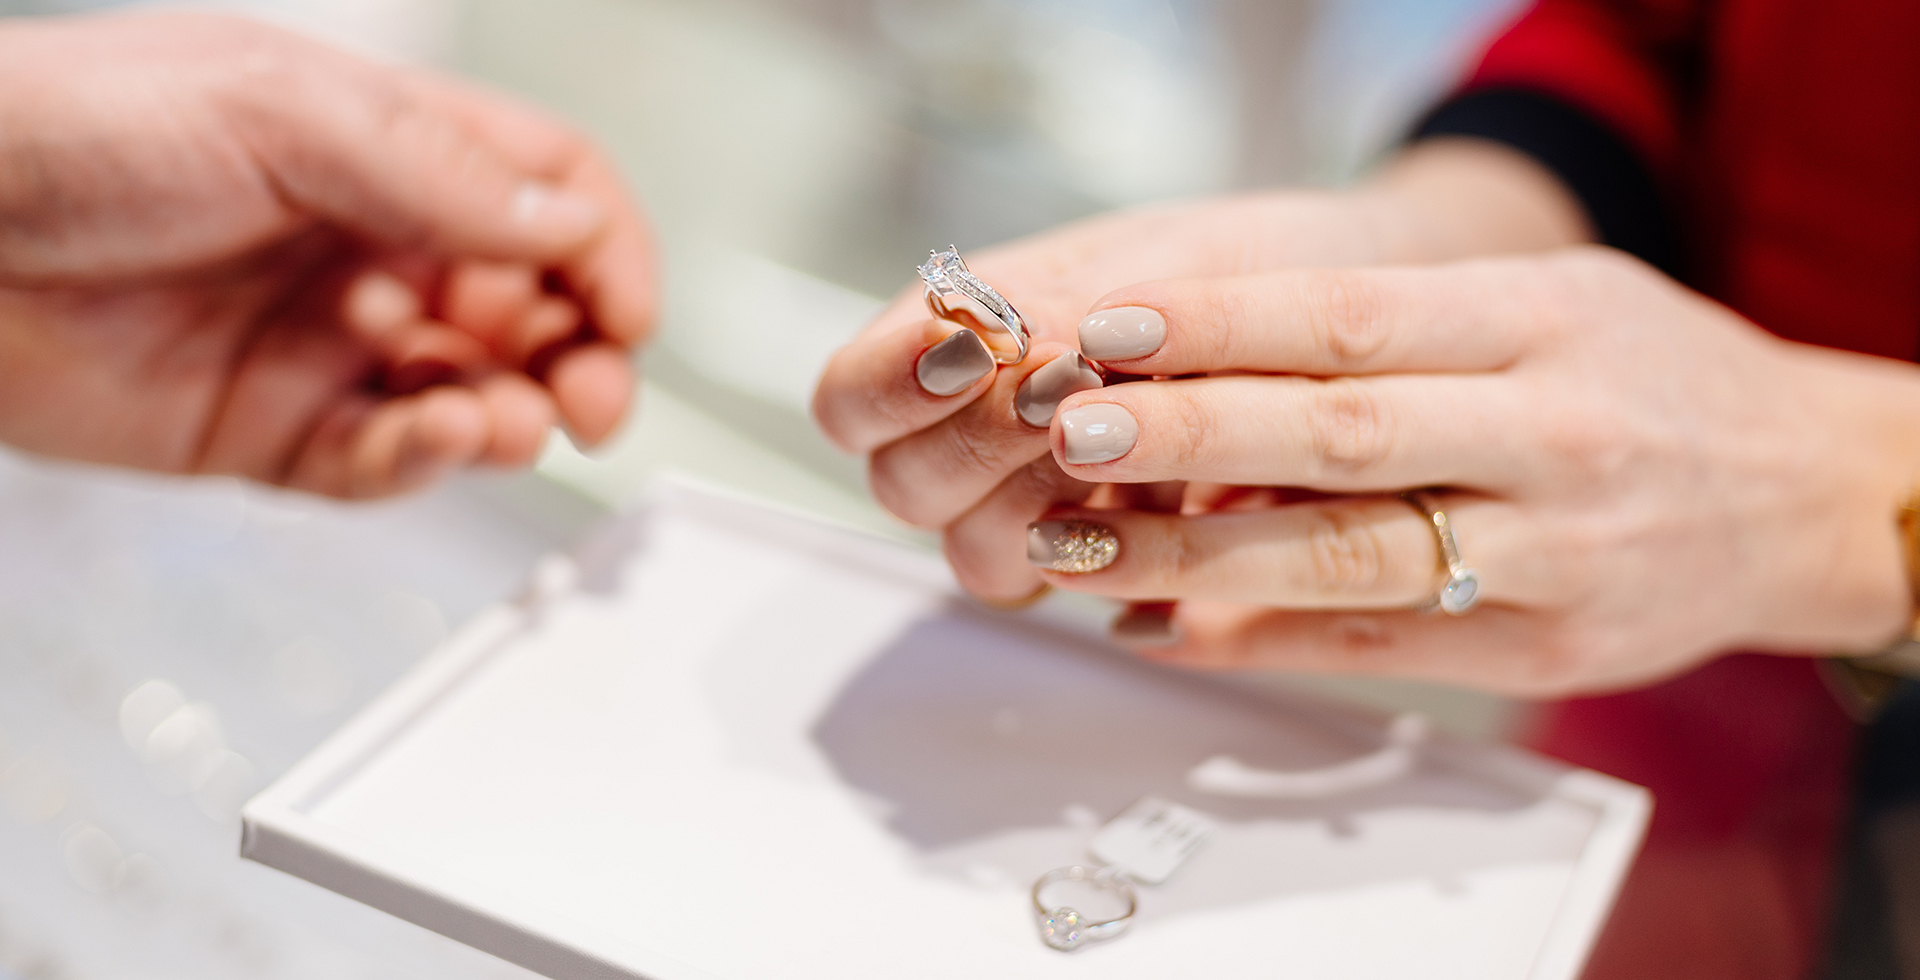 A woman showcases a diamond ring in a jewelry store